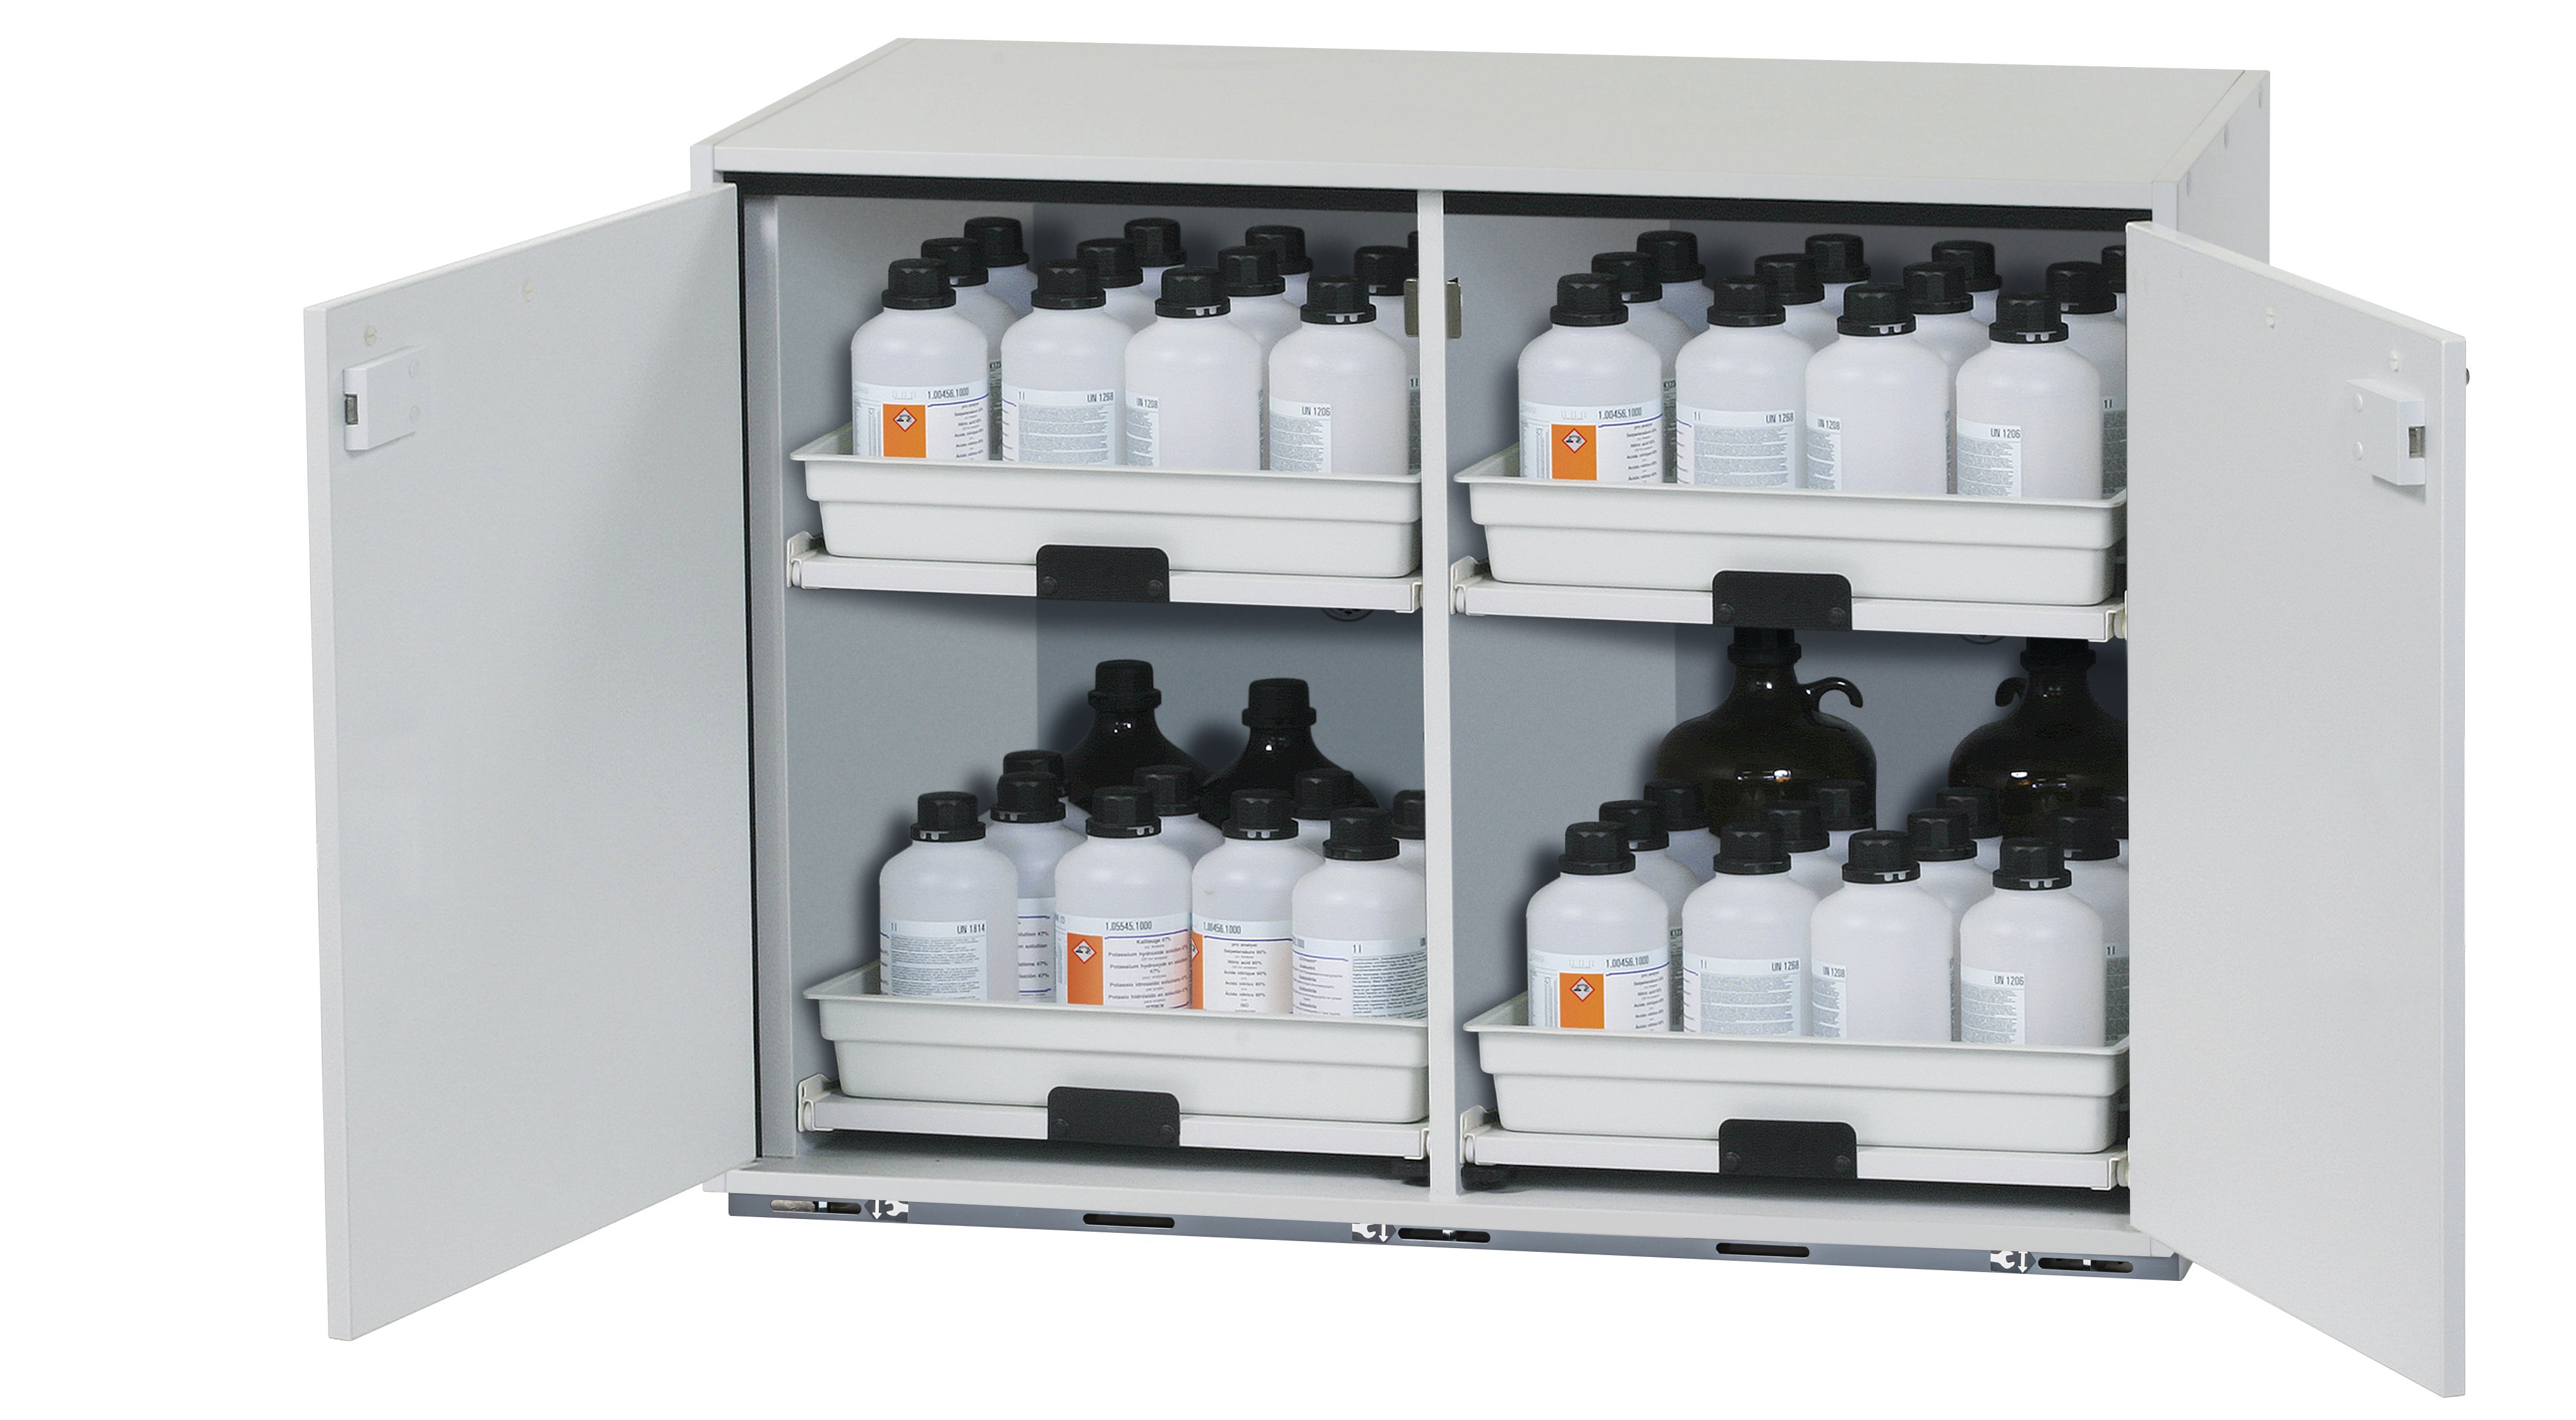 Acid and alkali base cabinet SL-CLASSIC-UB model SL.080.110.UB.2T in light gray with 4x AbZ pull-out shelves (FP plate/polypropylene)